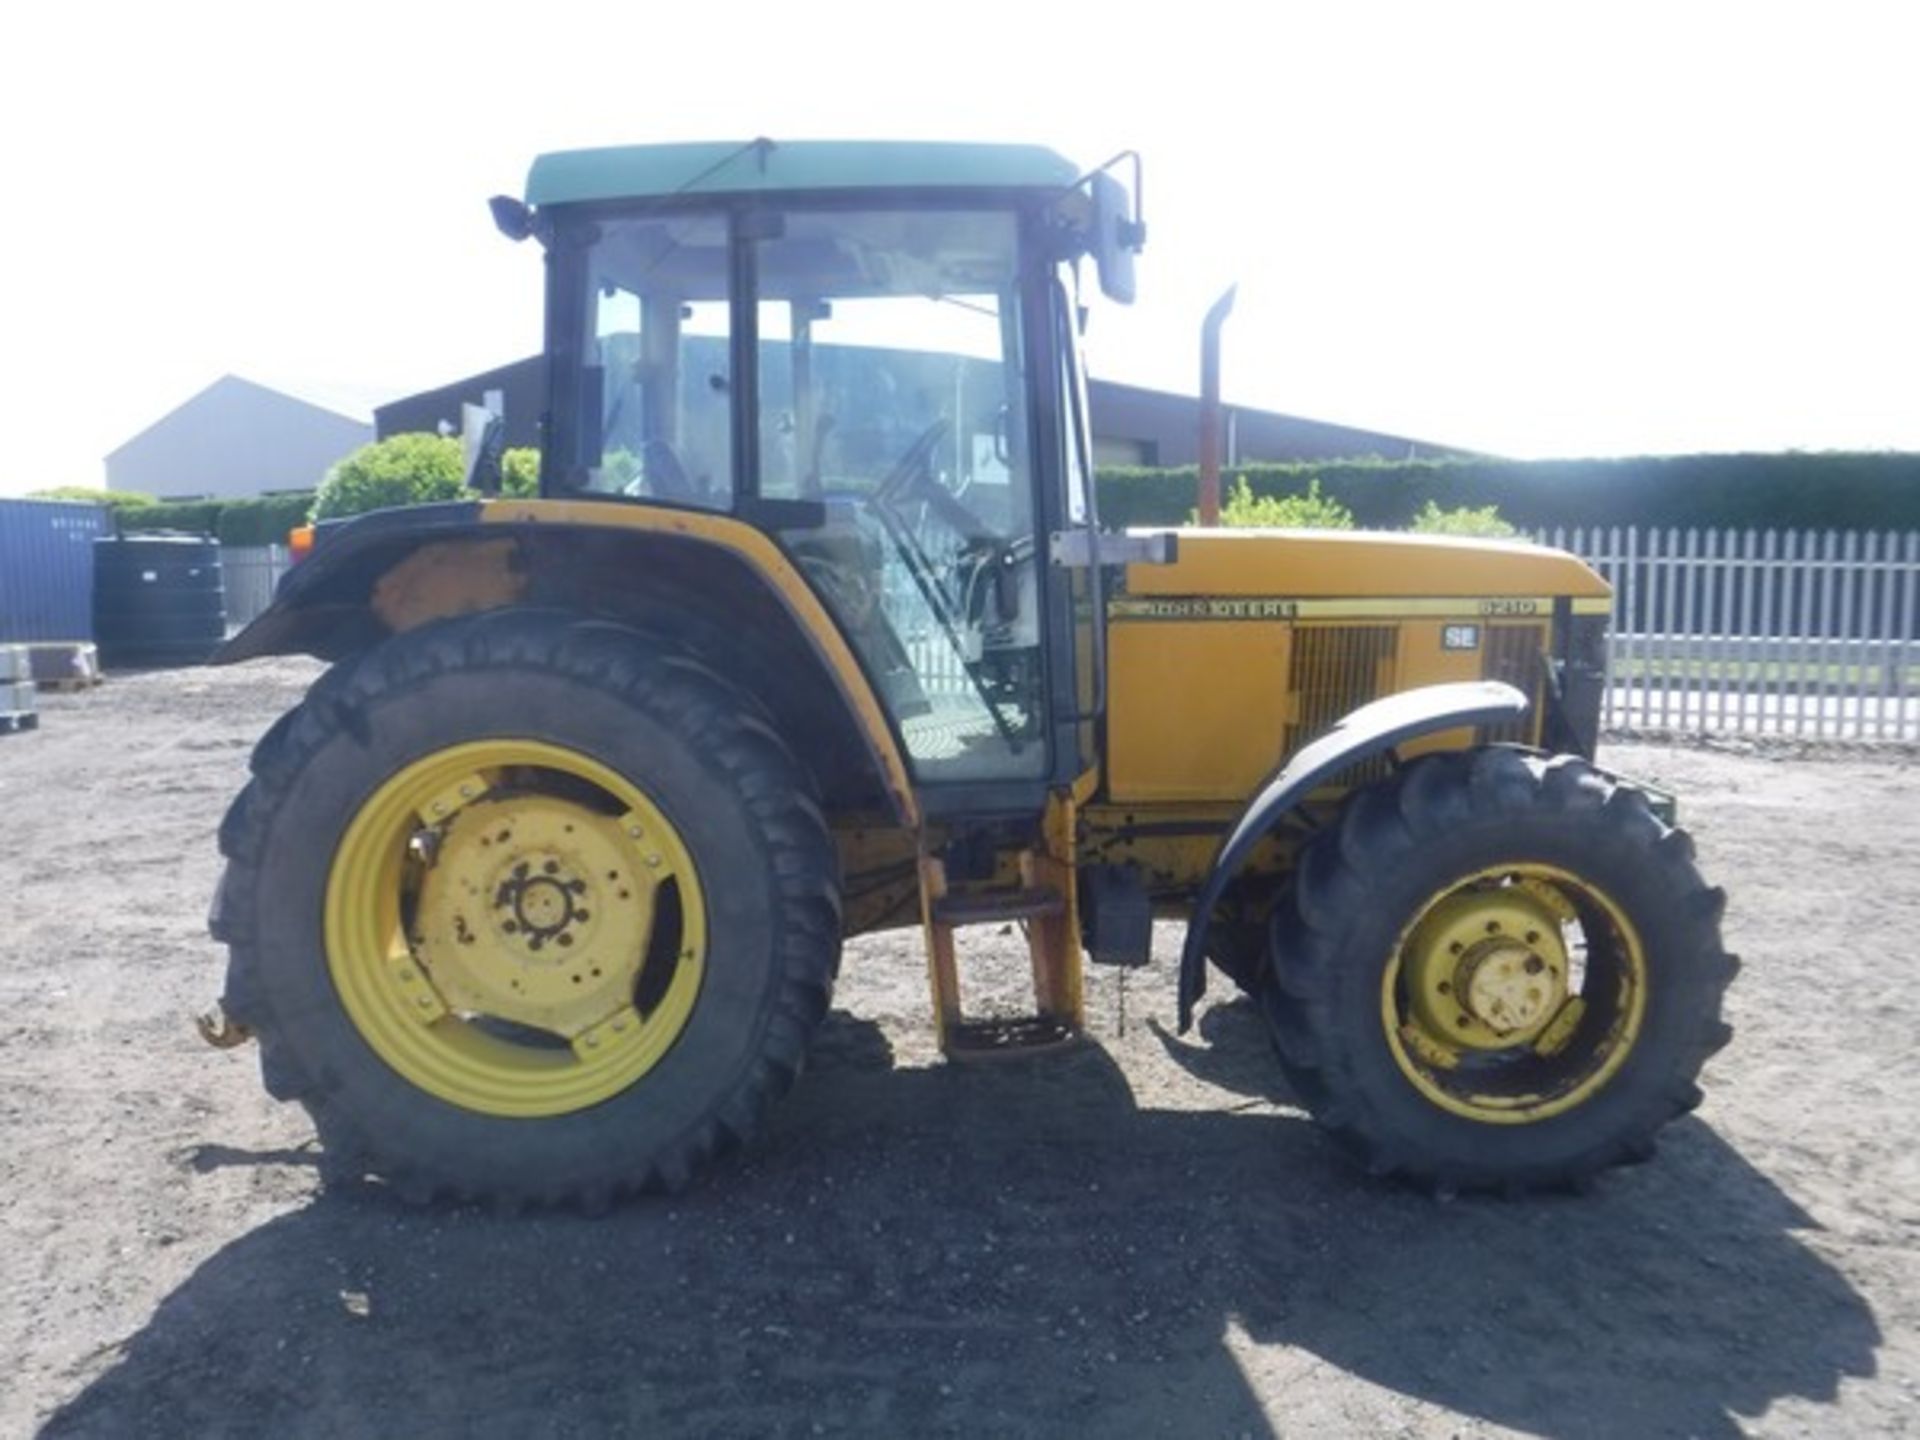 2000 JOHN DEERE 6210 tractor. Reg No W64 RKS s/n 106210Y278541. Hrs not known. Engine starting issu - Image 24 of 35